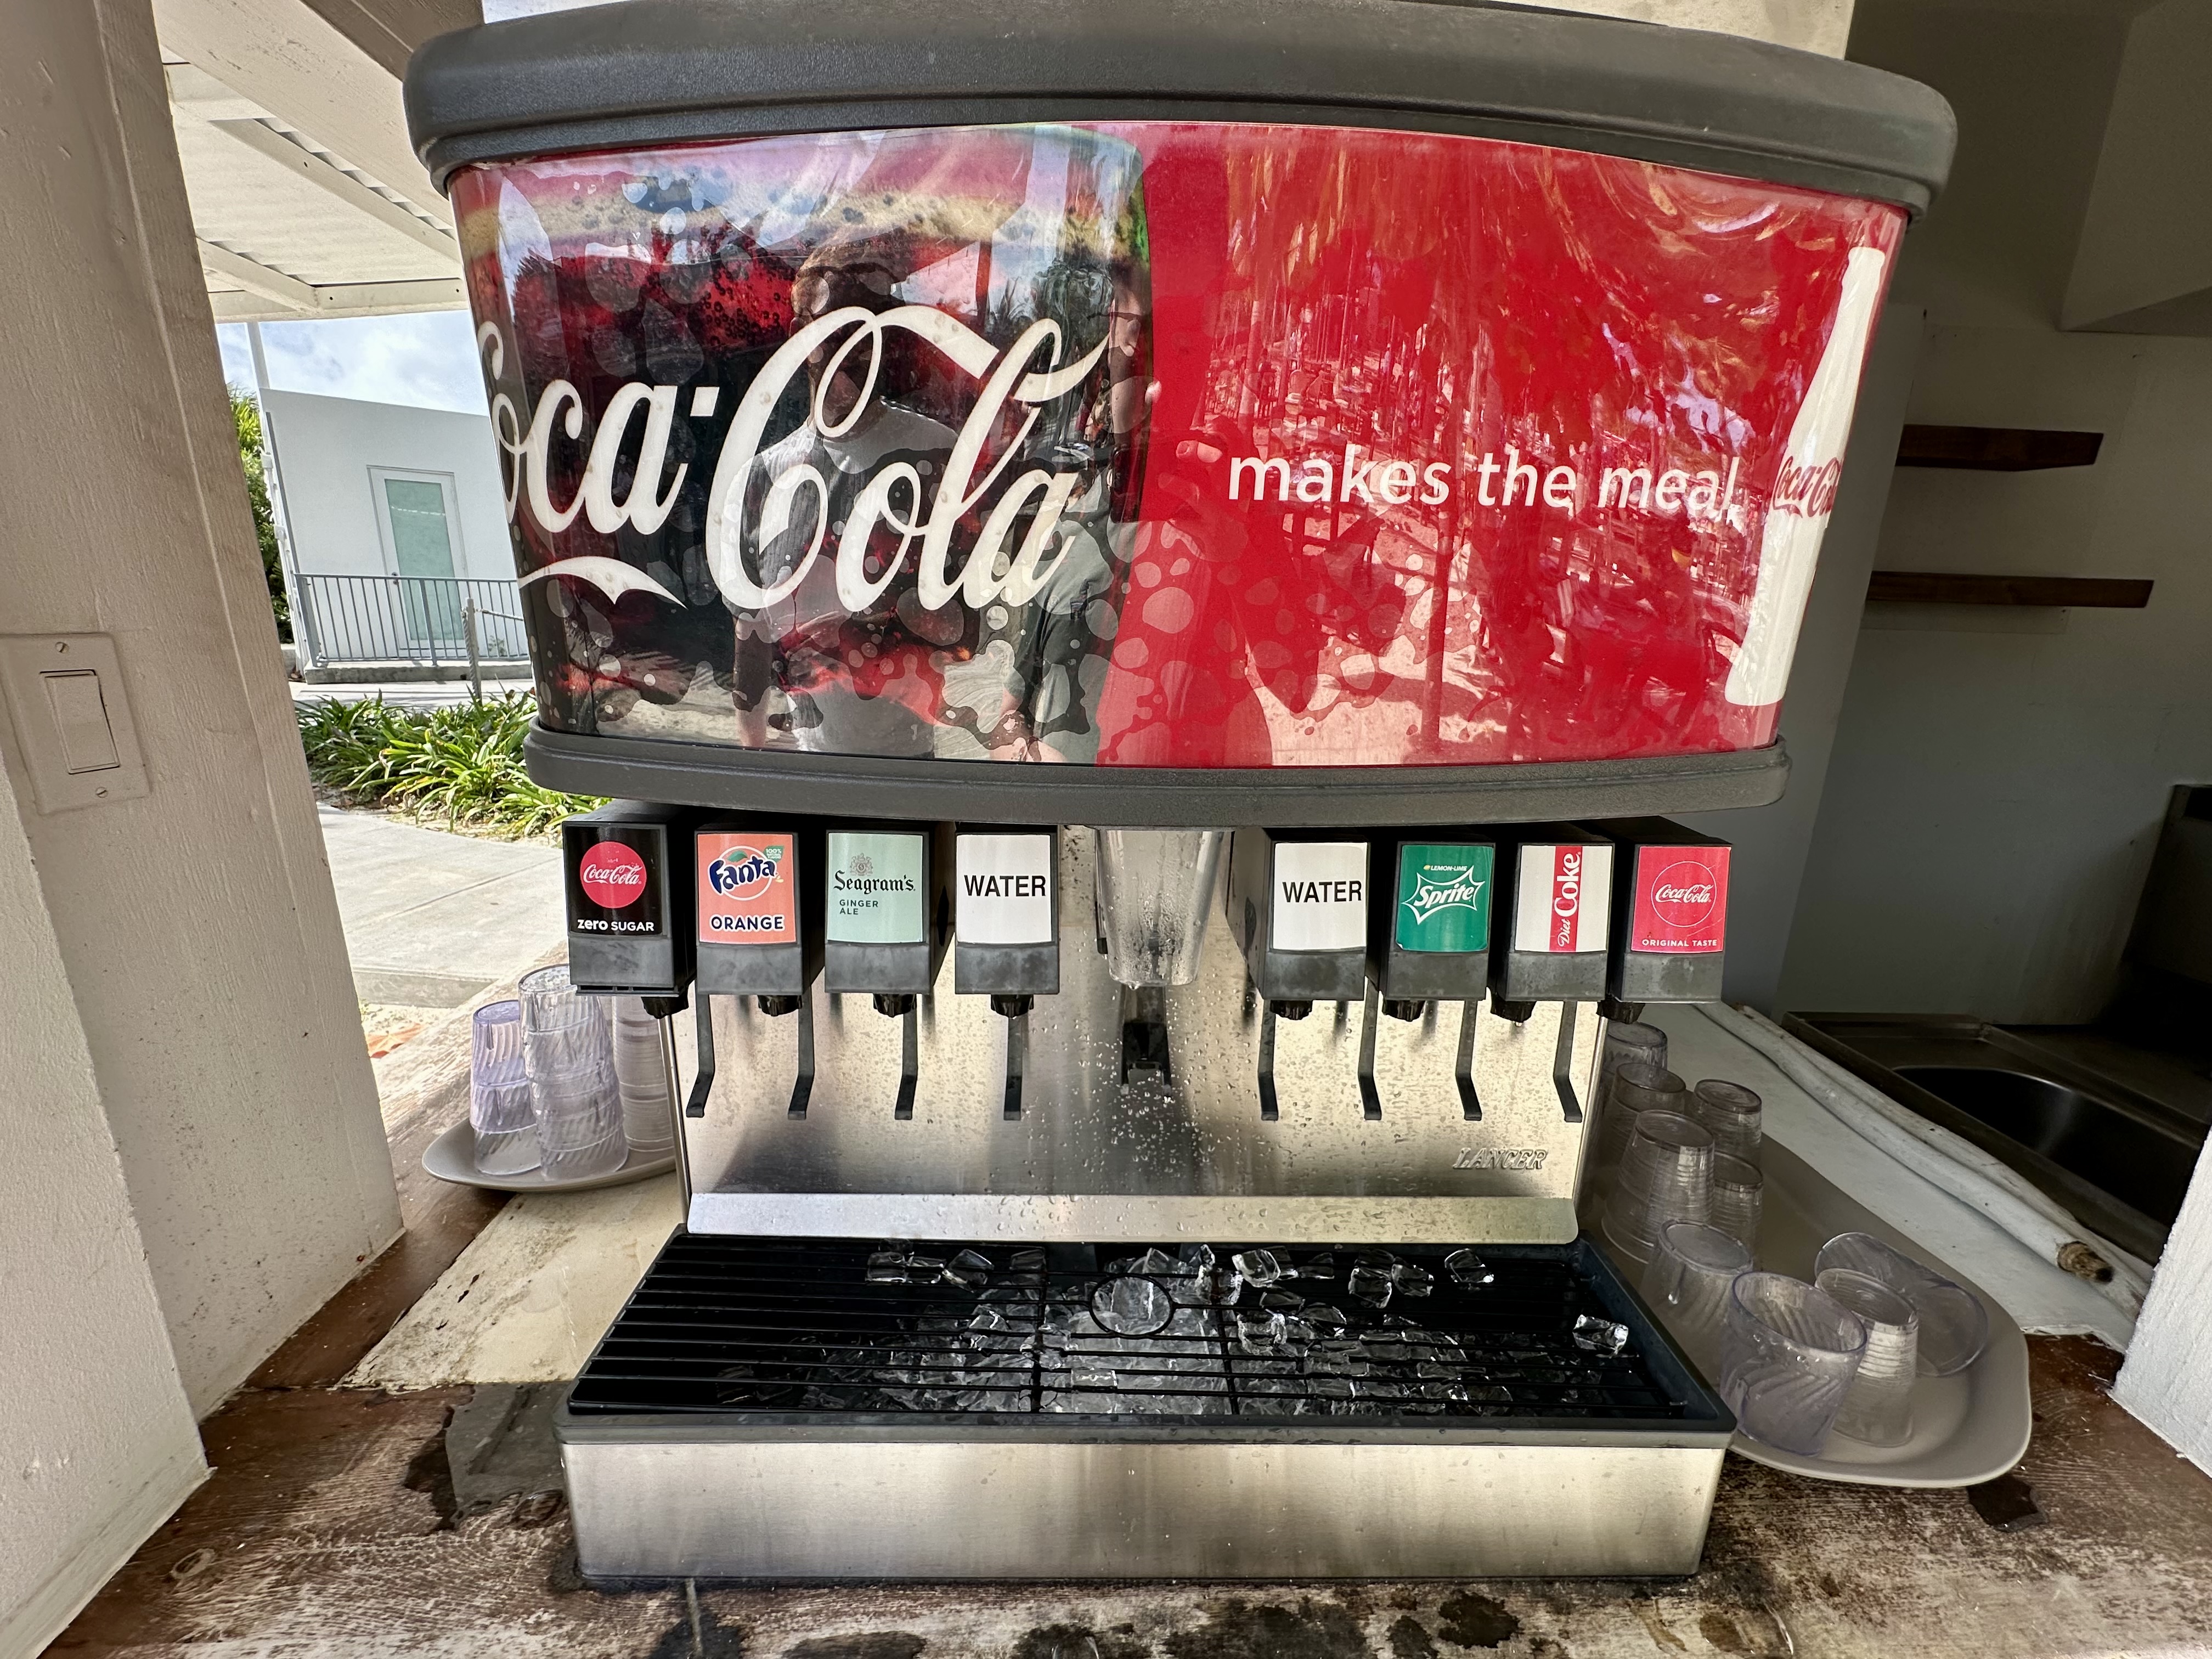 a soda dispenser with a red and white logo